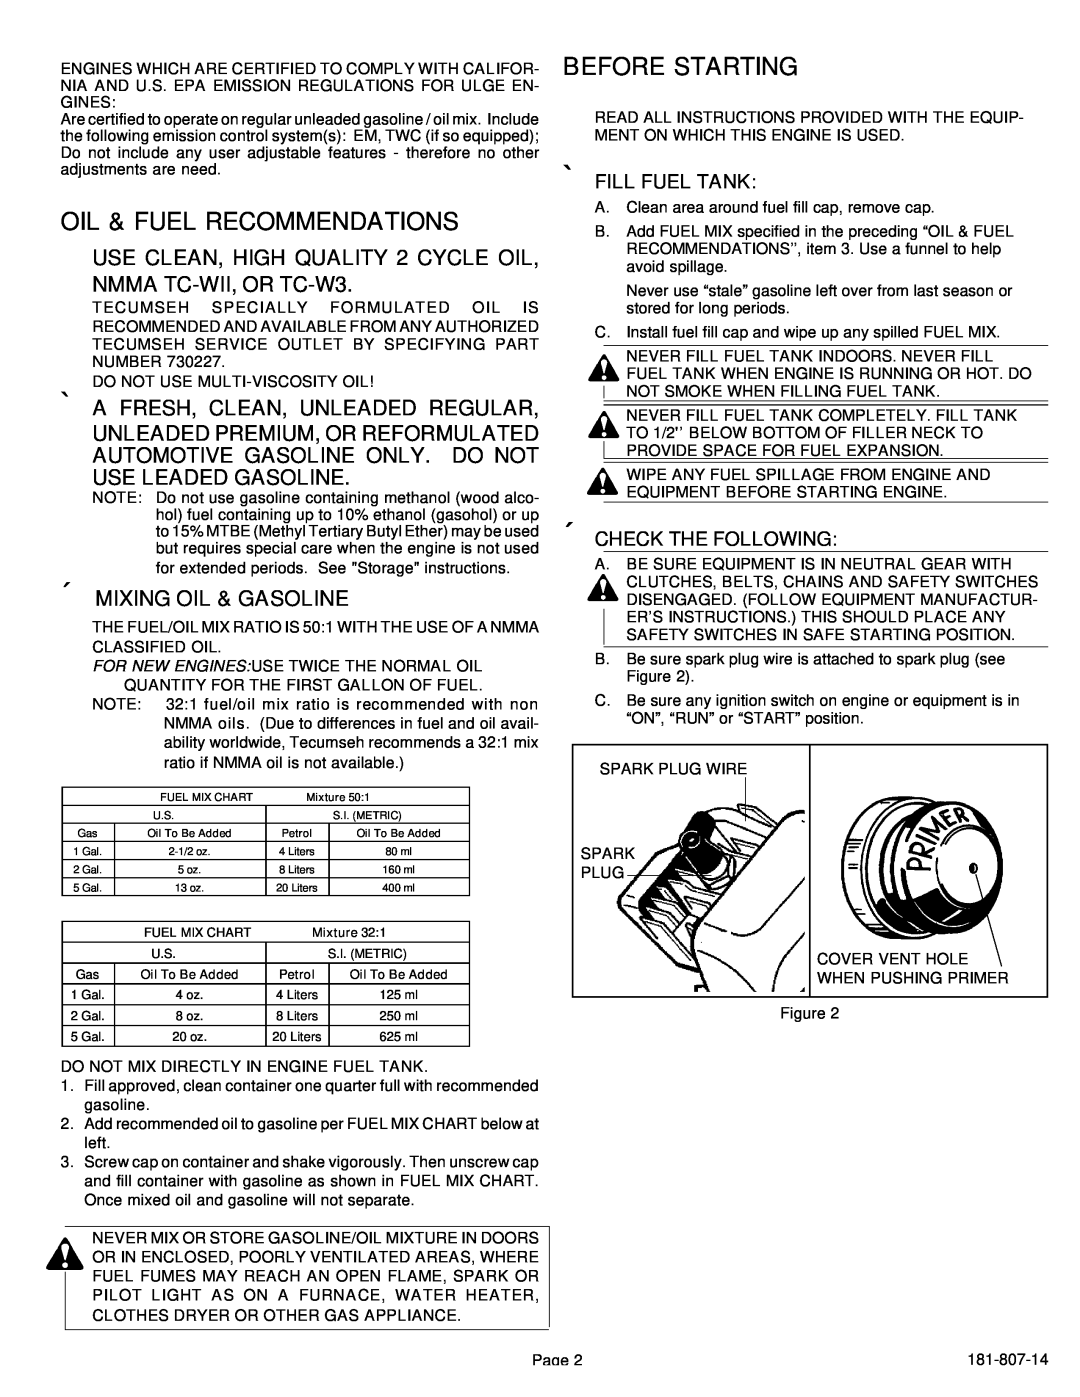 Tecumseh HSK845 Oil & Fuel Recommendations, Before Starting, À USE CLEAN, HIGH QUALITY 2 CYCLE OIL NMMA TC-WII, OR TC-W3 